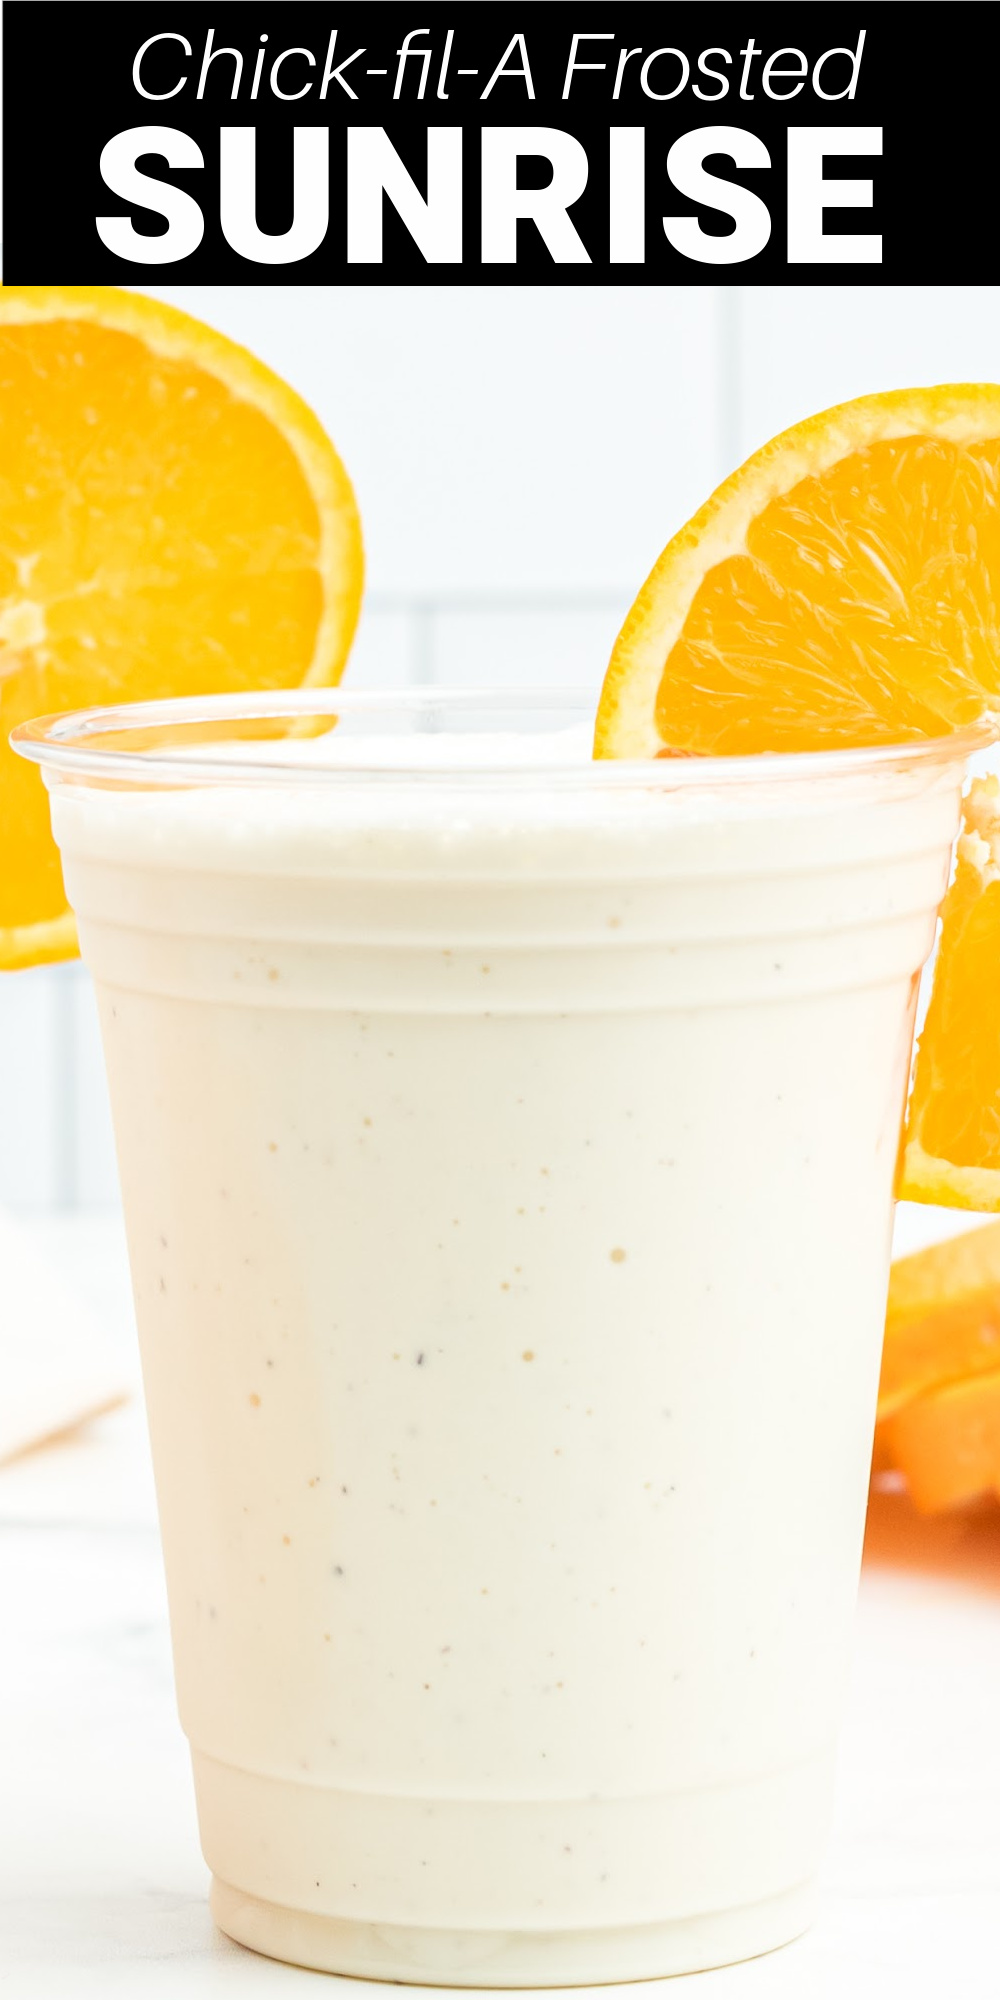 This copycat Chick-Fil-A Frosted Sunrise drink is a perfect creamy orange milkshake for a hot summer day. It's similar to Chick-fil-A's Frosted Lemonade just with fresh orange flavor!